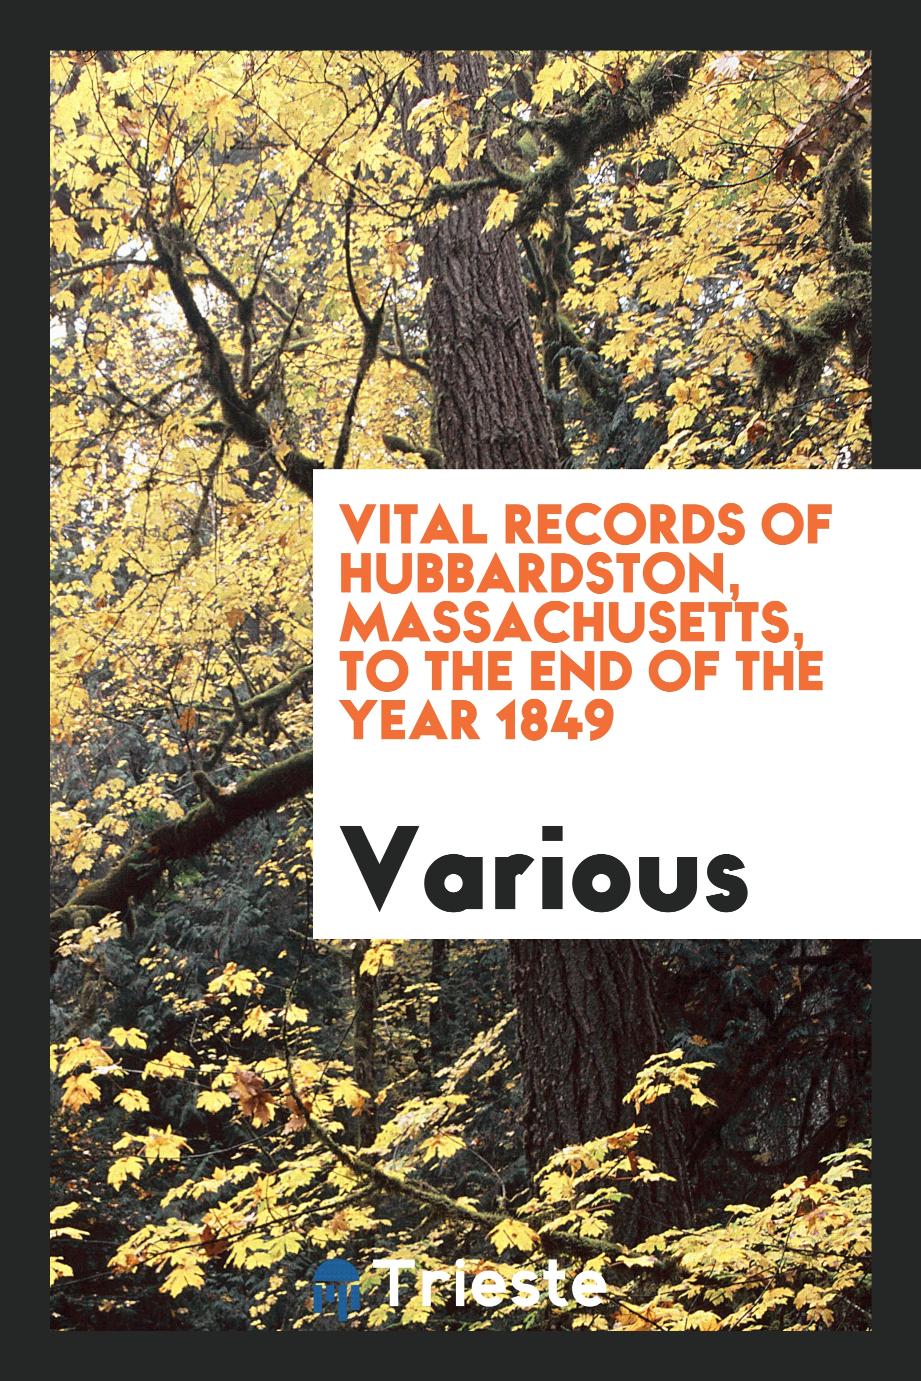 Vital records of Hubbardston, Massachusetts, to the end of the year 1849